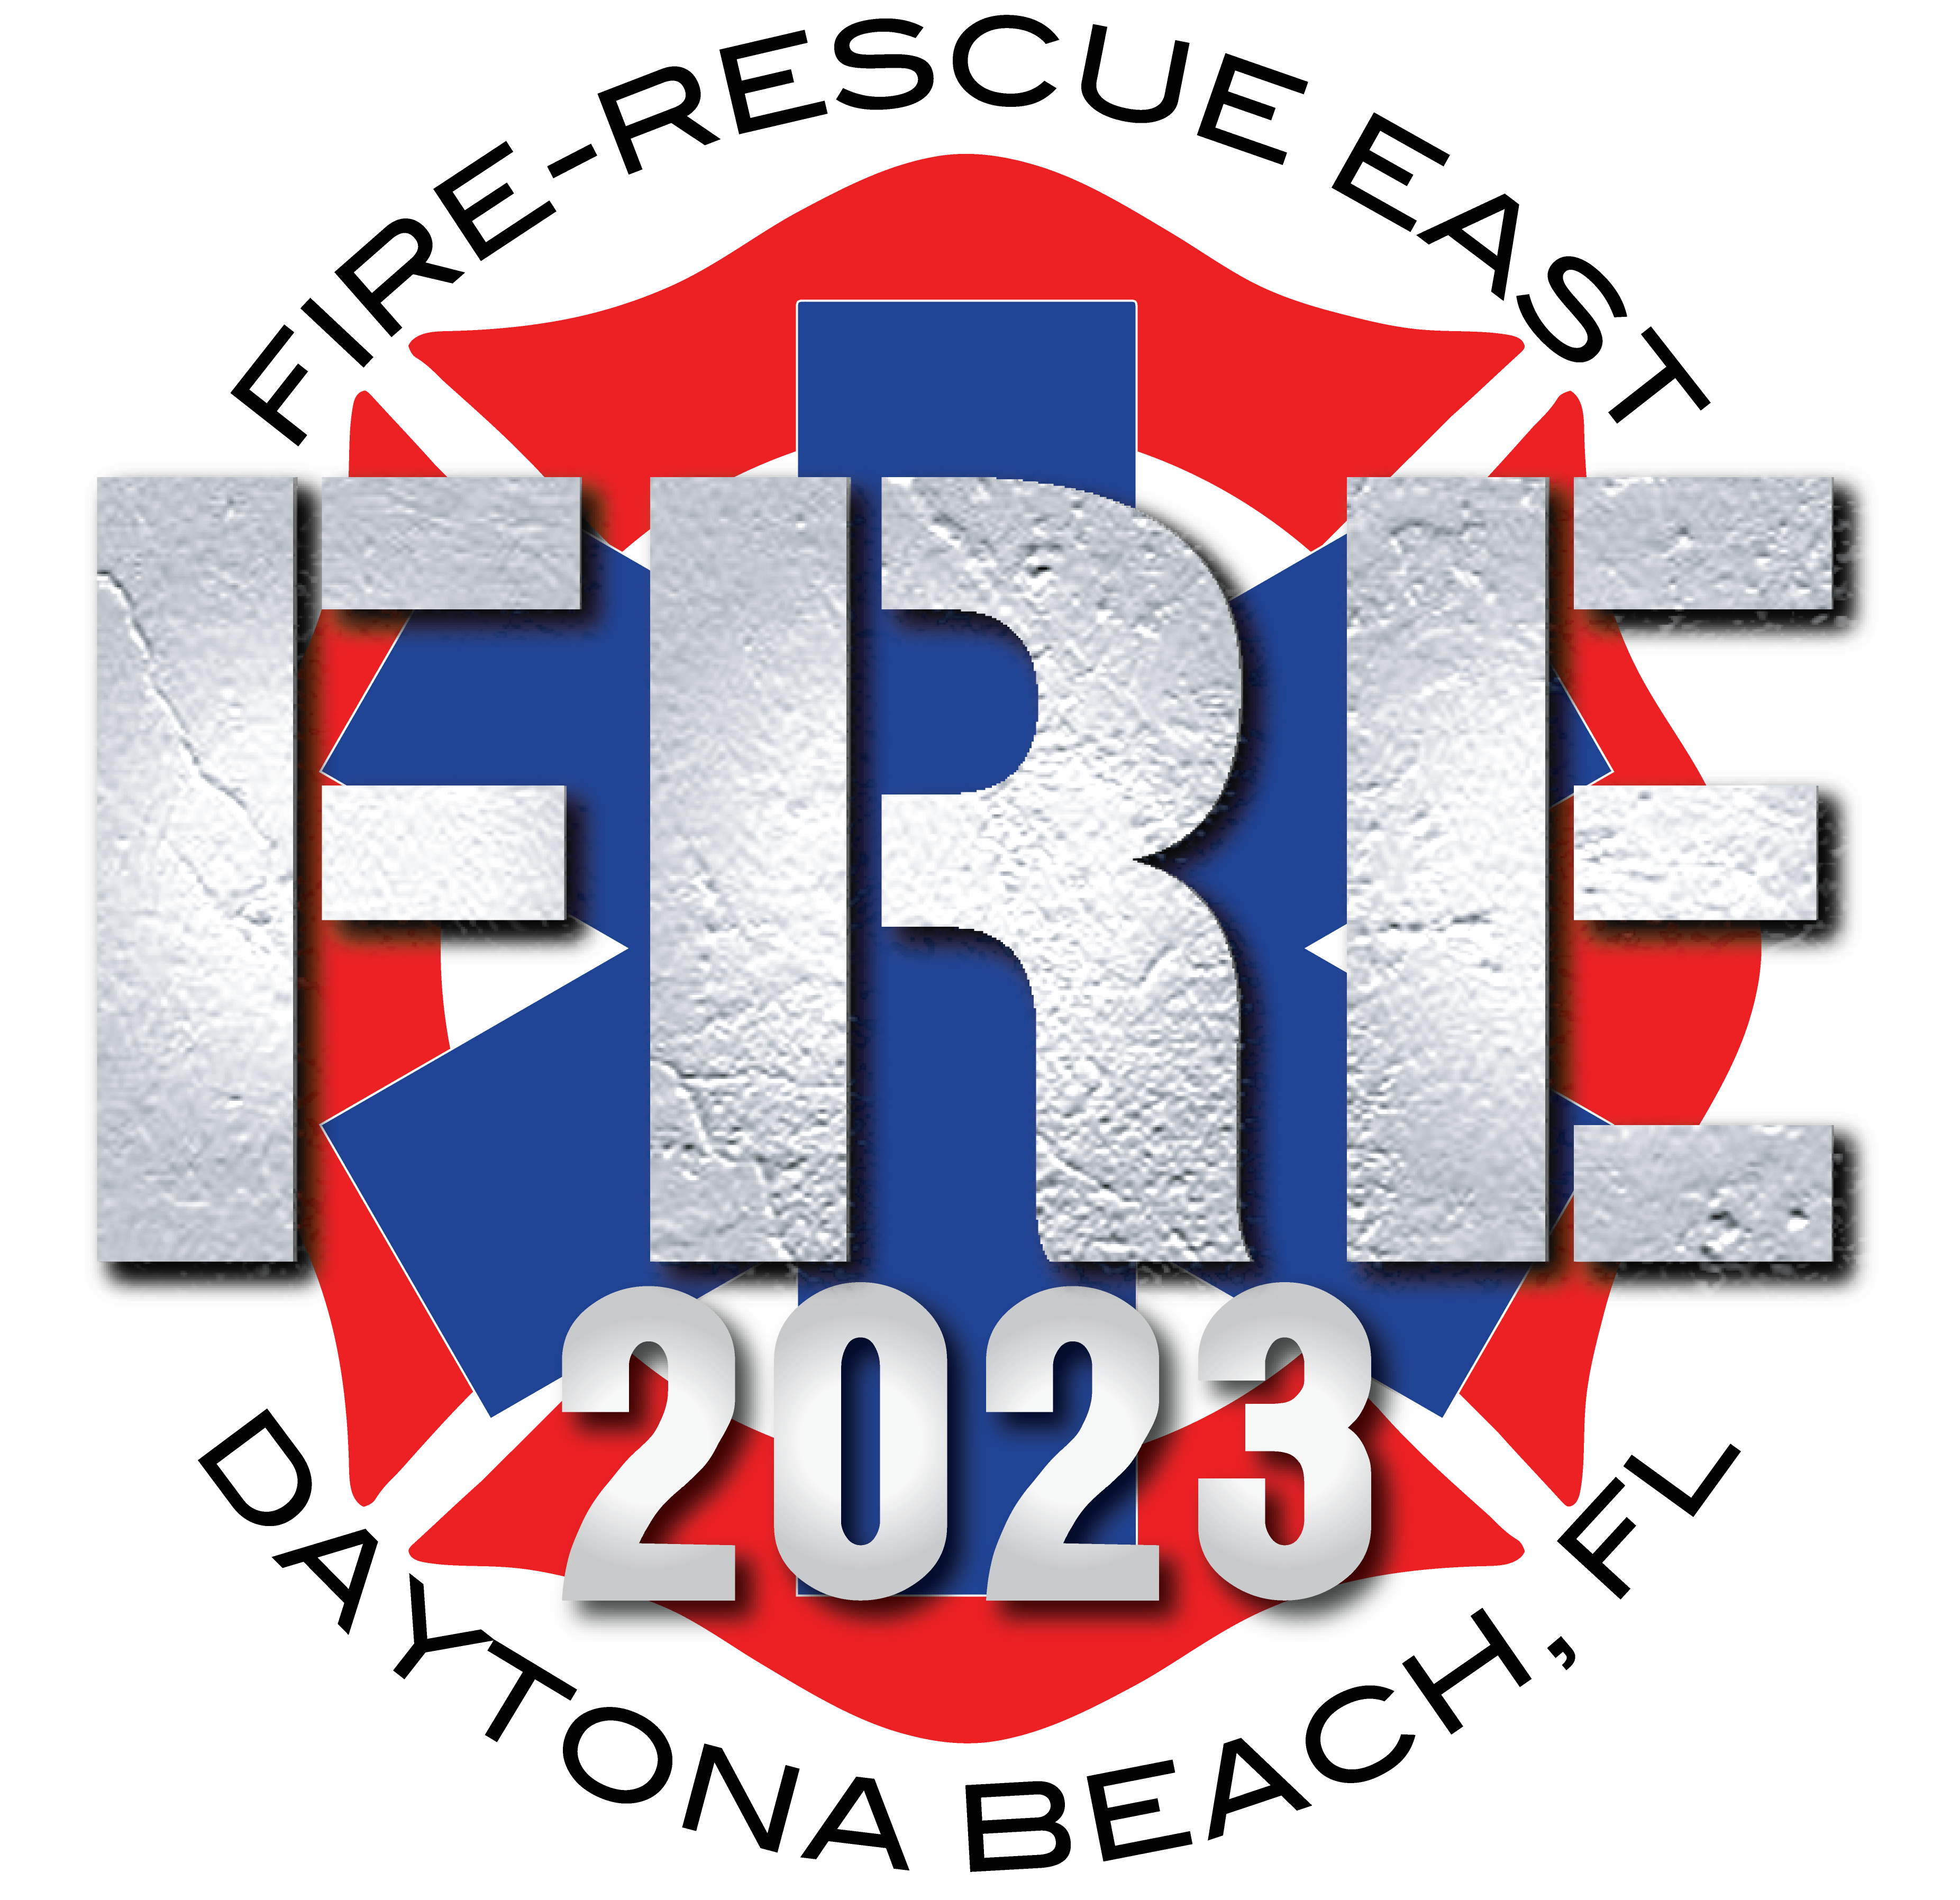 Fire-Rescue EAST 2023